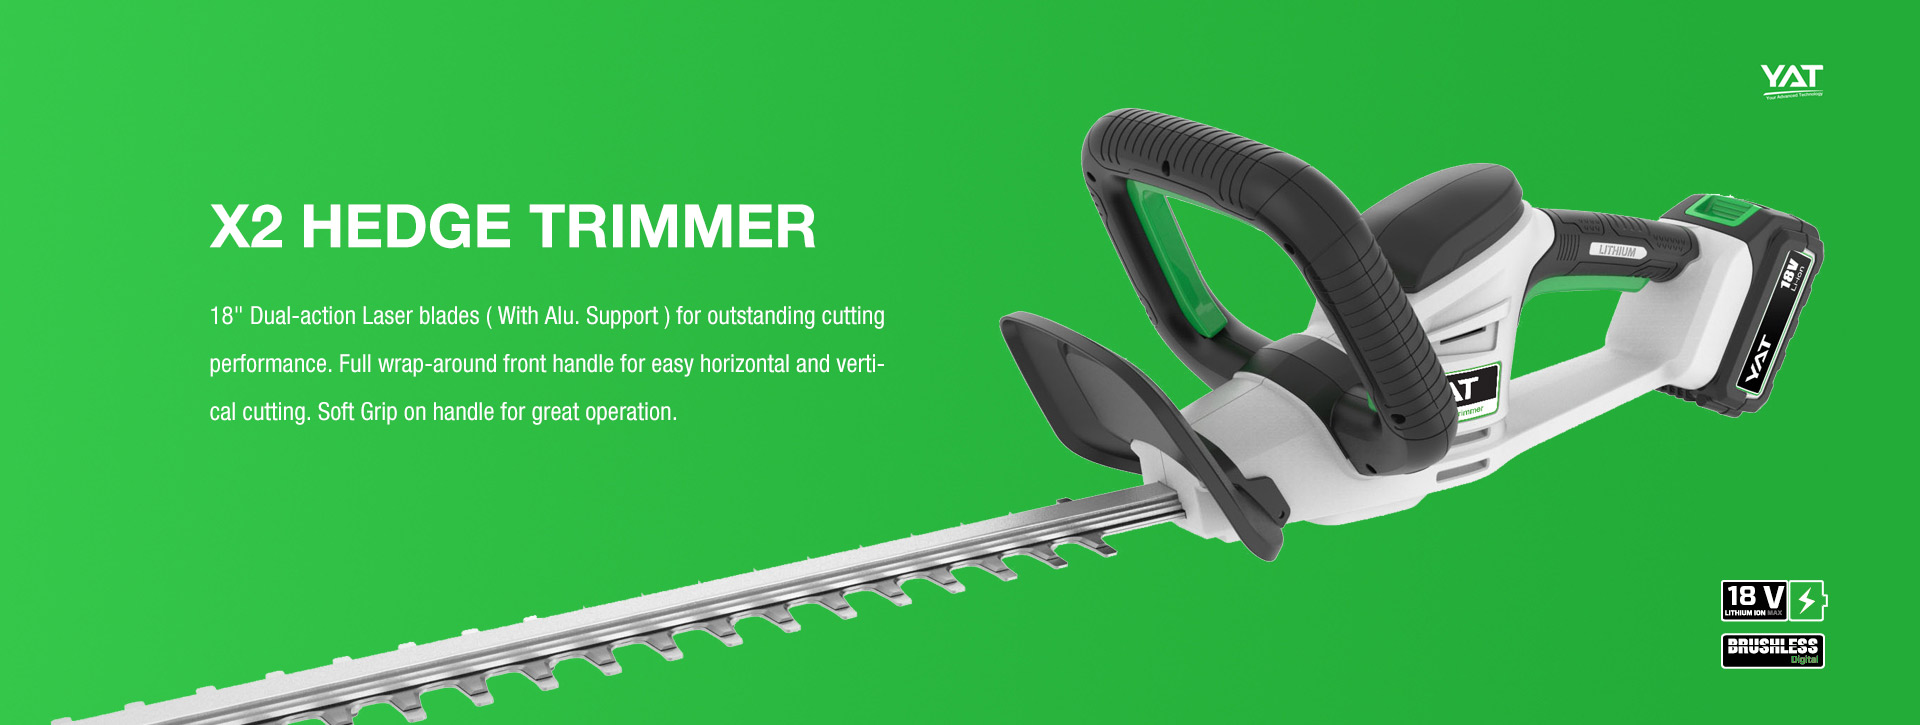 X2 HEDGE TRIMMER